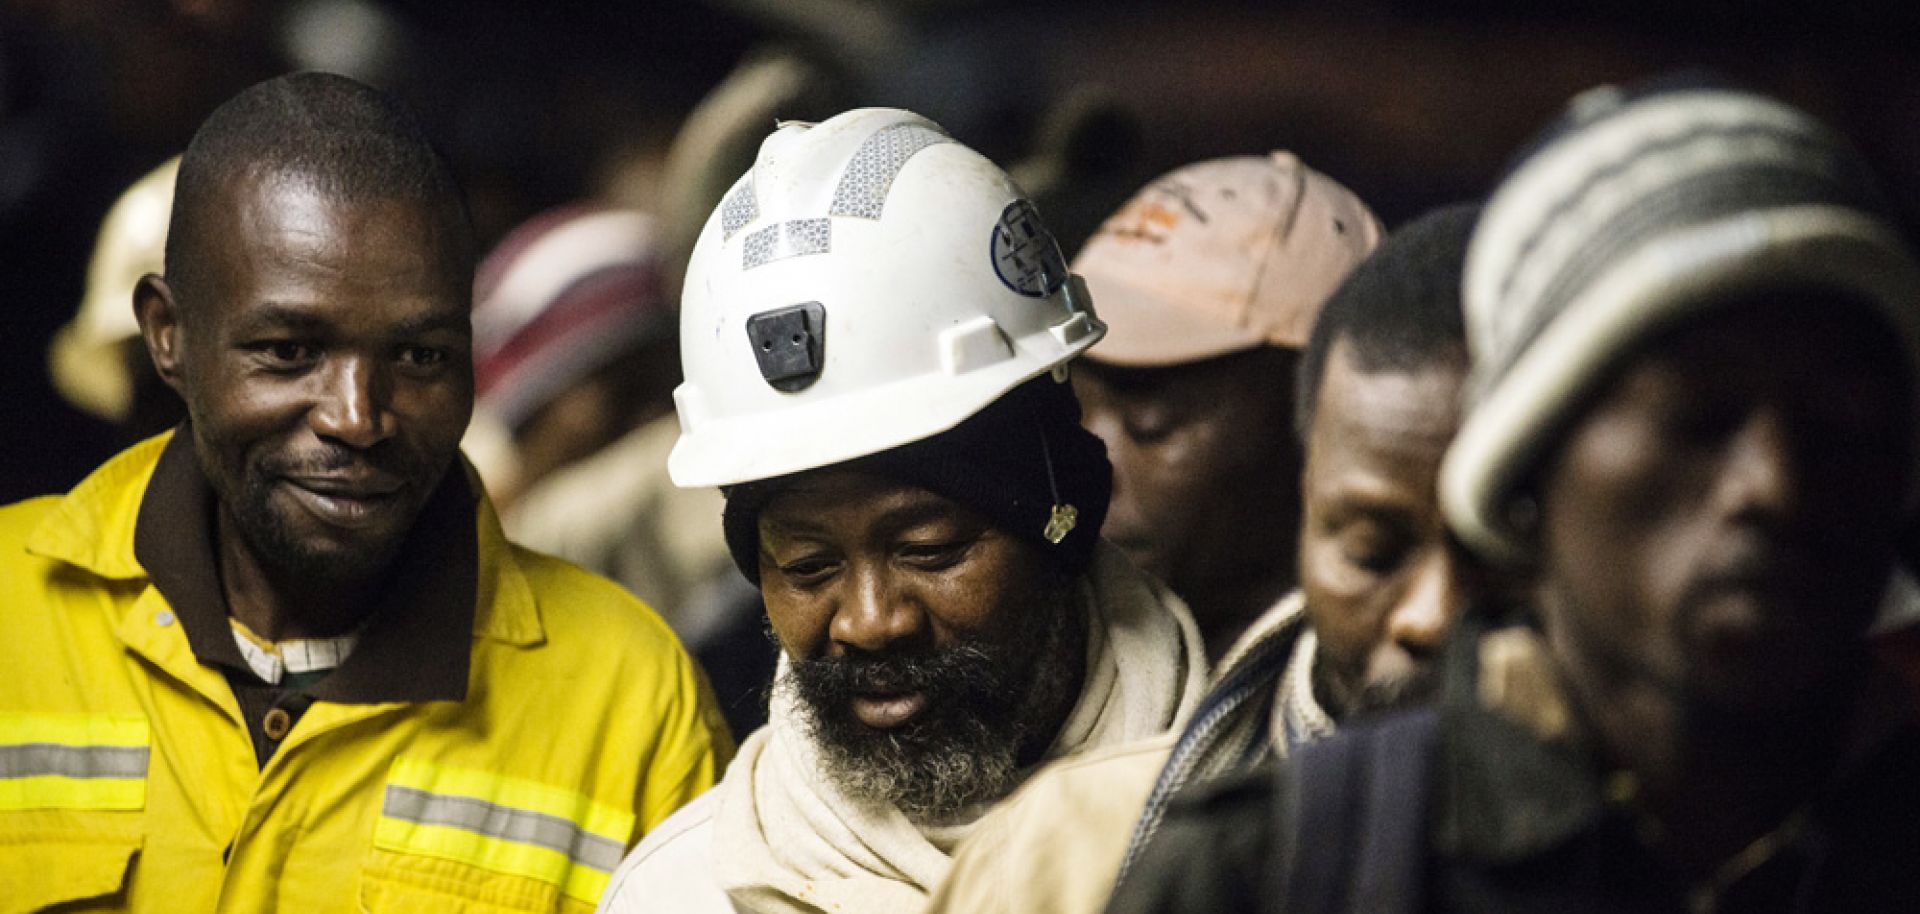 Escalating Labor Disputes in South Africa Reflect Deeper Pressures